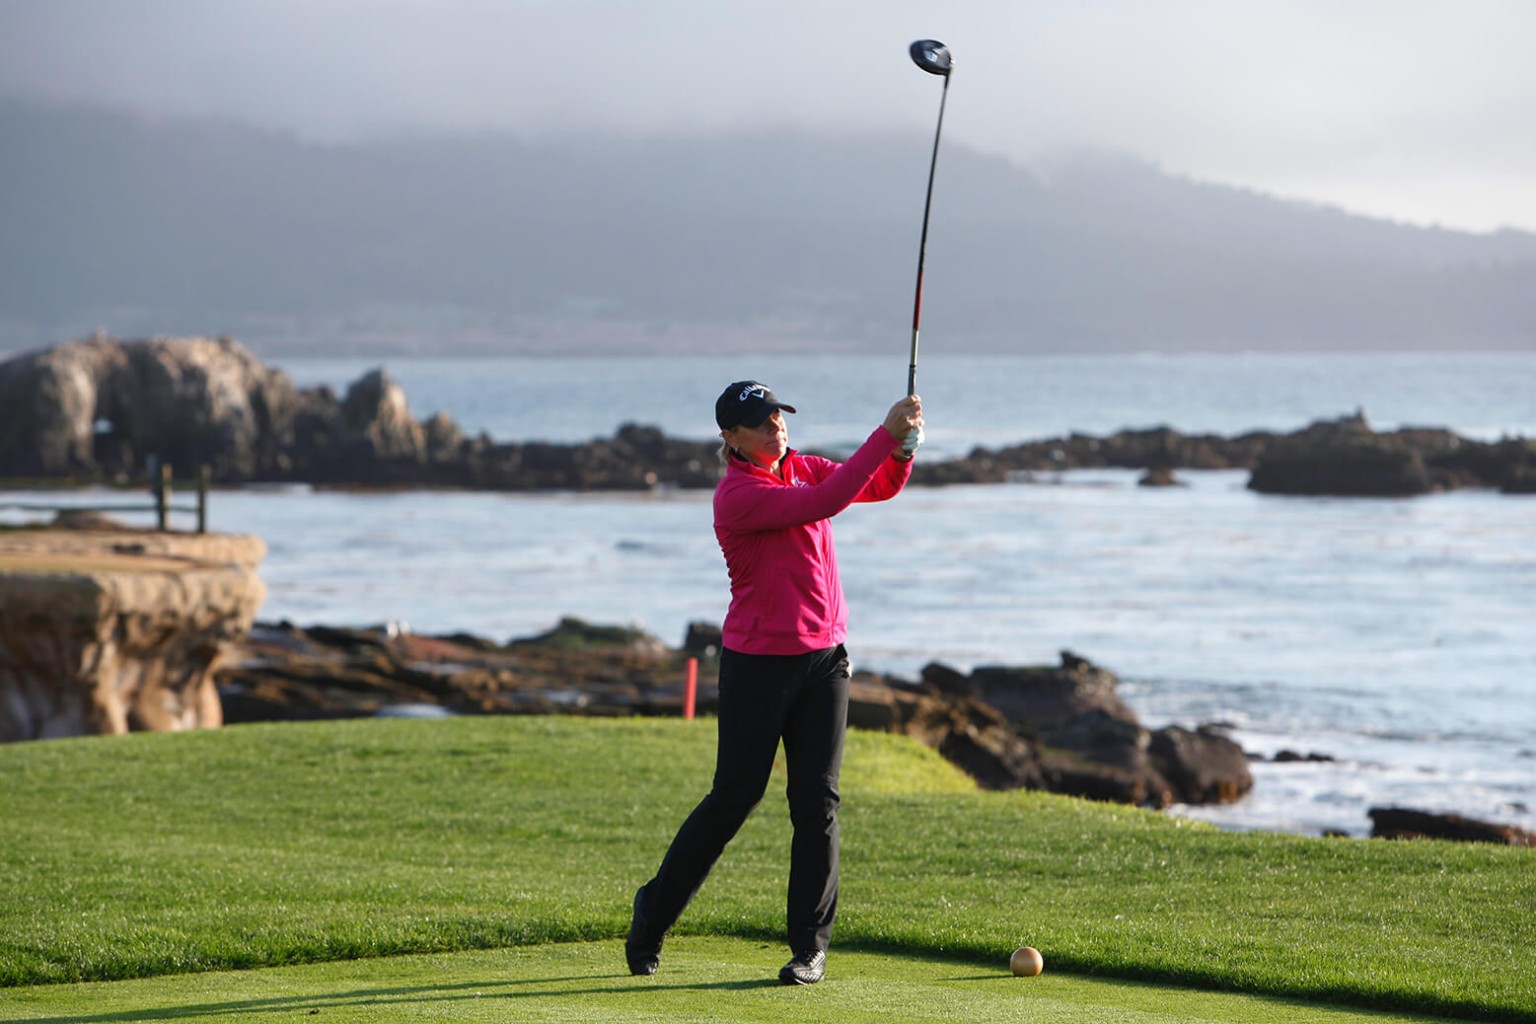 TaylorMade Pebble Beach Invitational presented by DELL Technologies